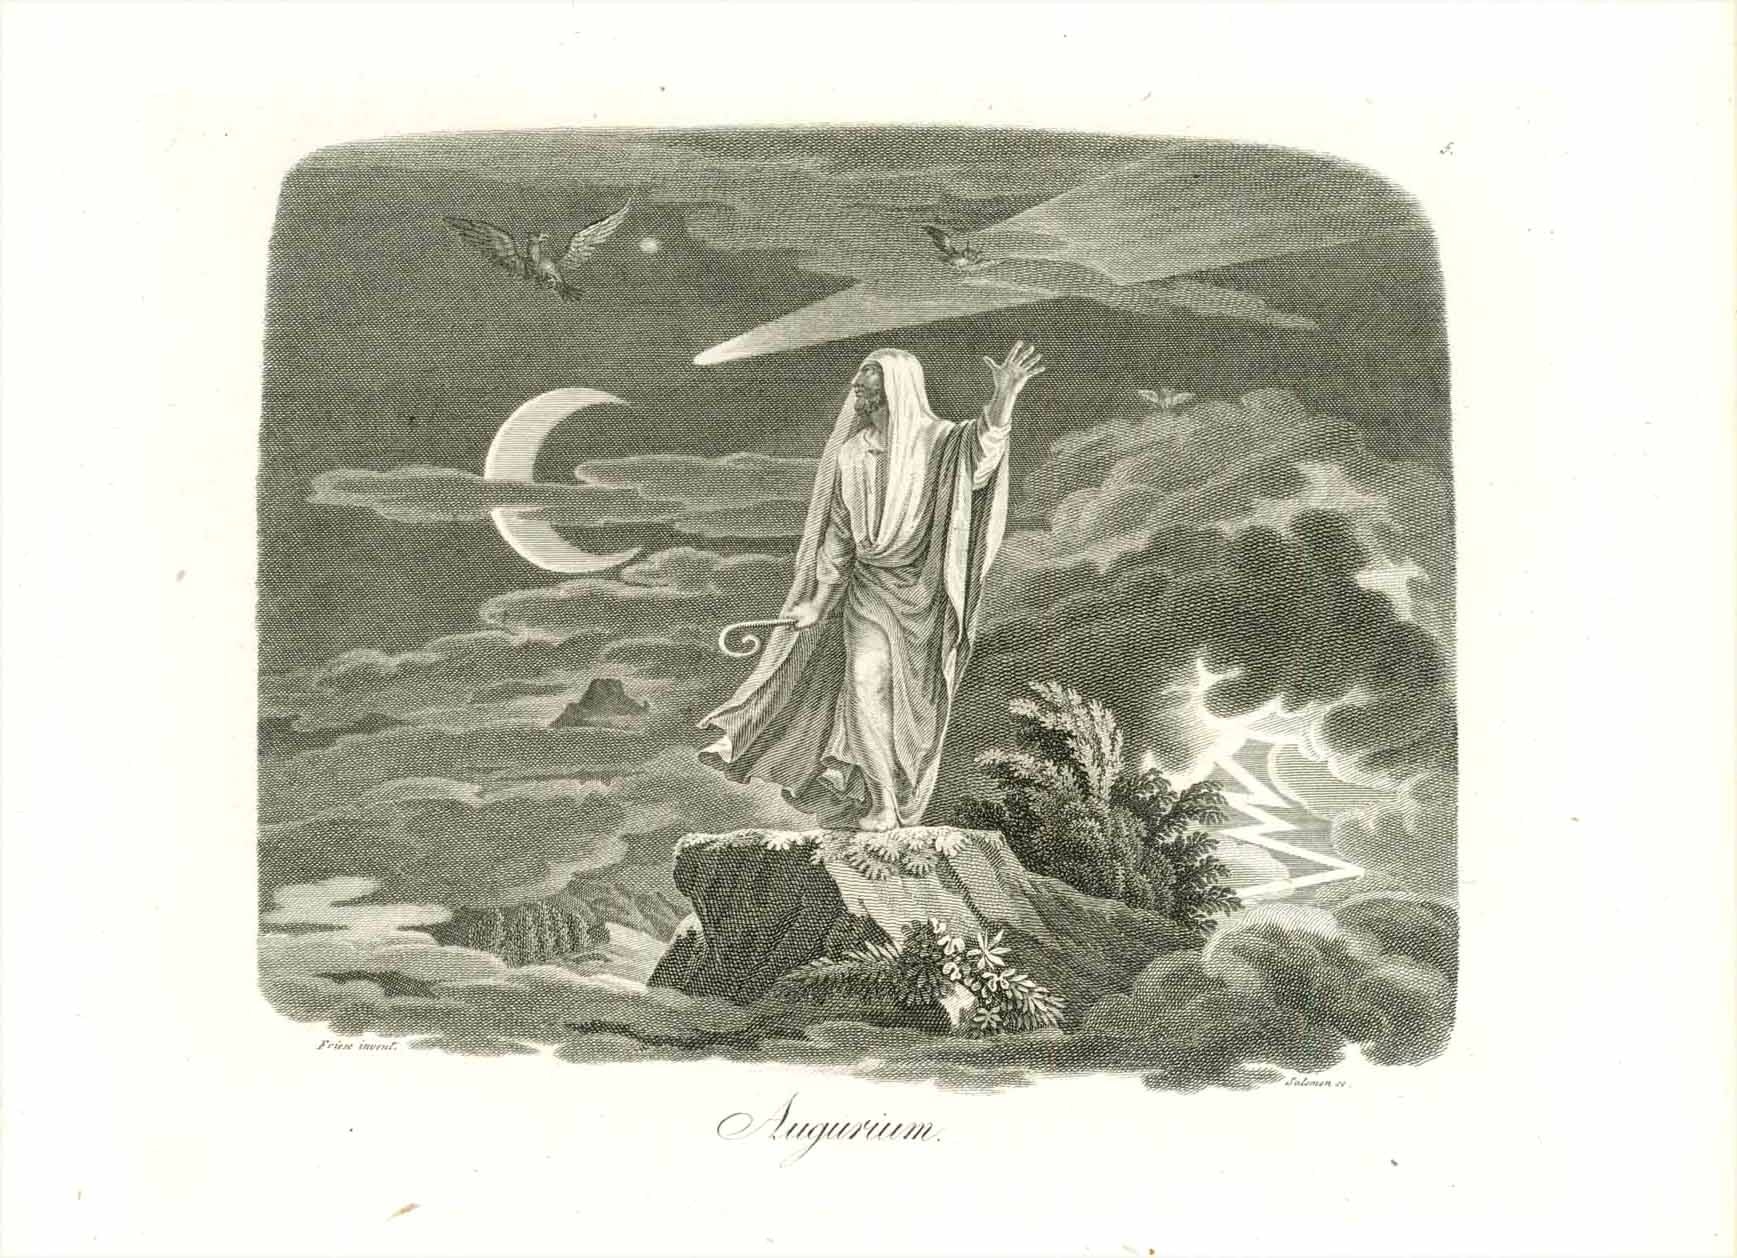 "Augurium"  Copper etching by Salomon after Friese  Ca. 1830/40  An Augur was, in classical Roman times, a priest who practiced augury (prophecy).  He interpreted the will of the Gods by observing the flight of birds. This practice was called  "taking the auspices". Any major undertaking (be it military, commercial or religious) was preceded by a ceremony, in which the Augur interpreted good or bad luck from the birds' flight.